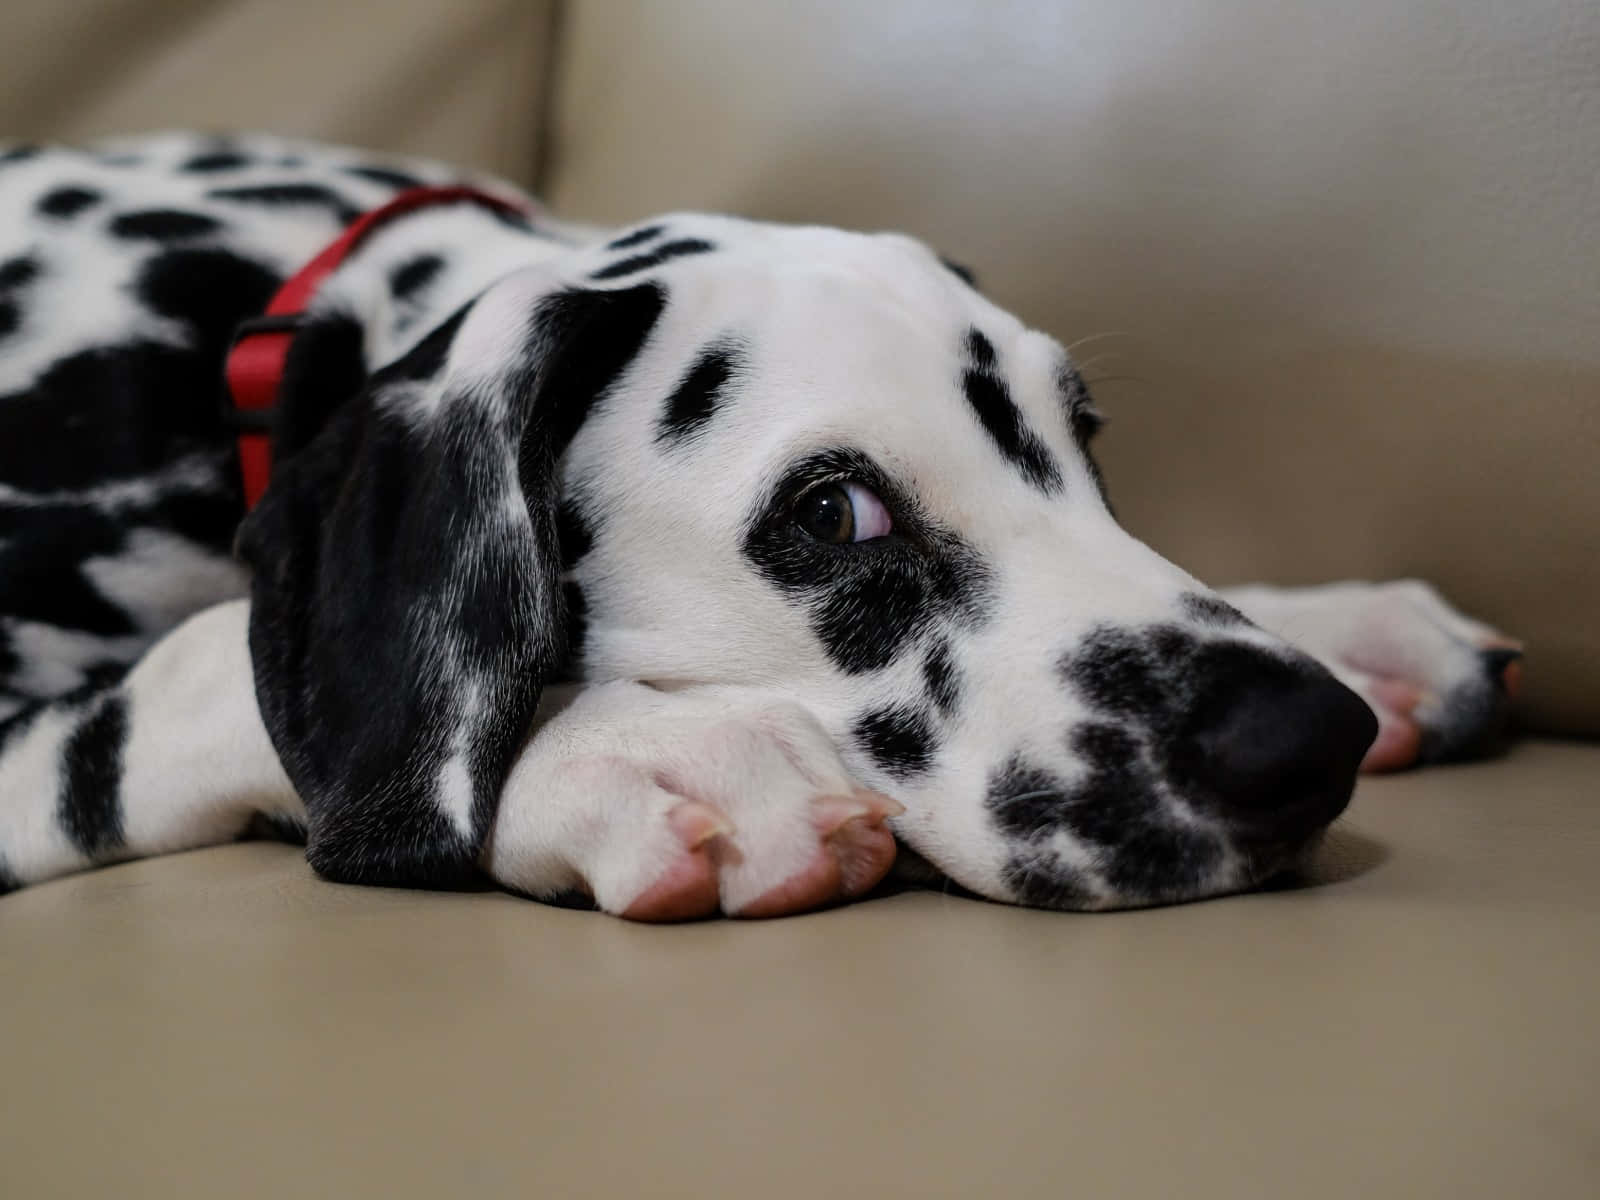 An adorable Dalmatian puppy ready for its daily adventure